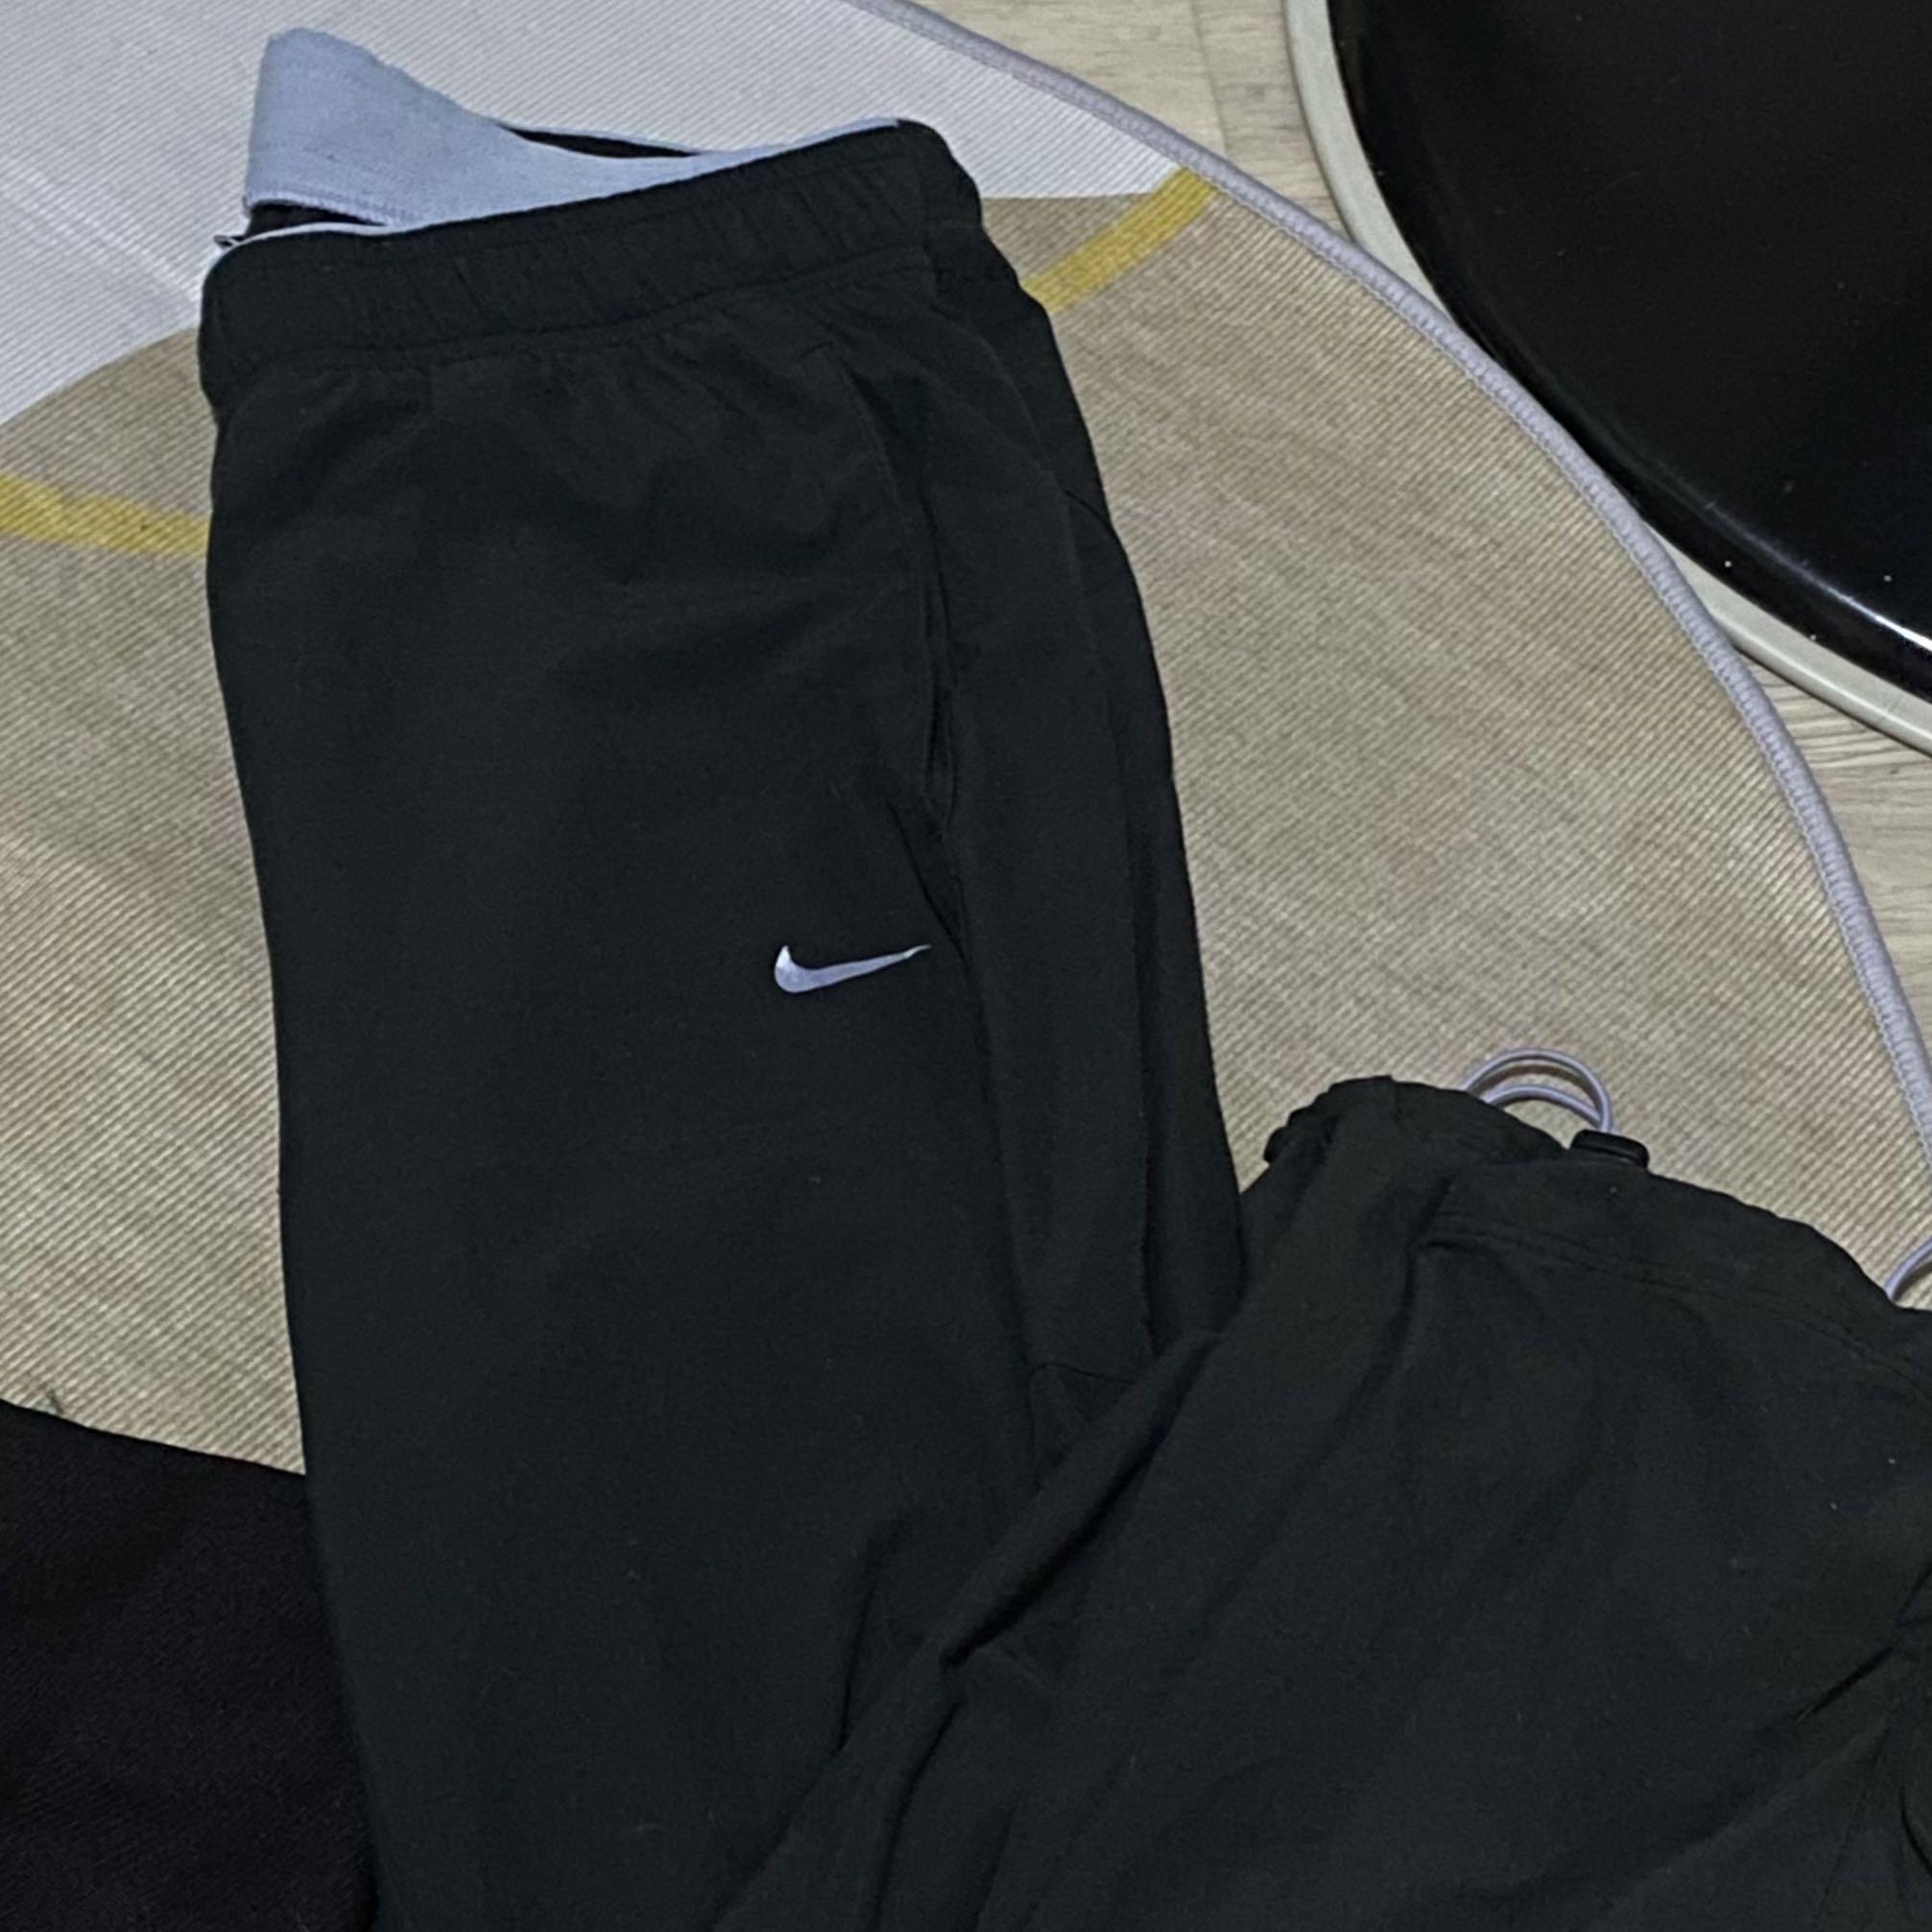 Vintage Nike track pants, Women's Fashion, Clothes on Carousell